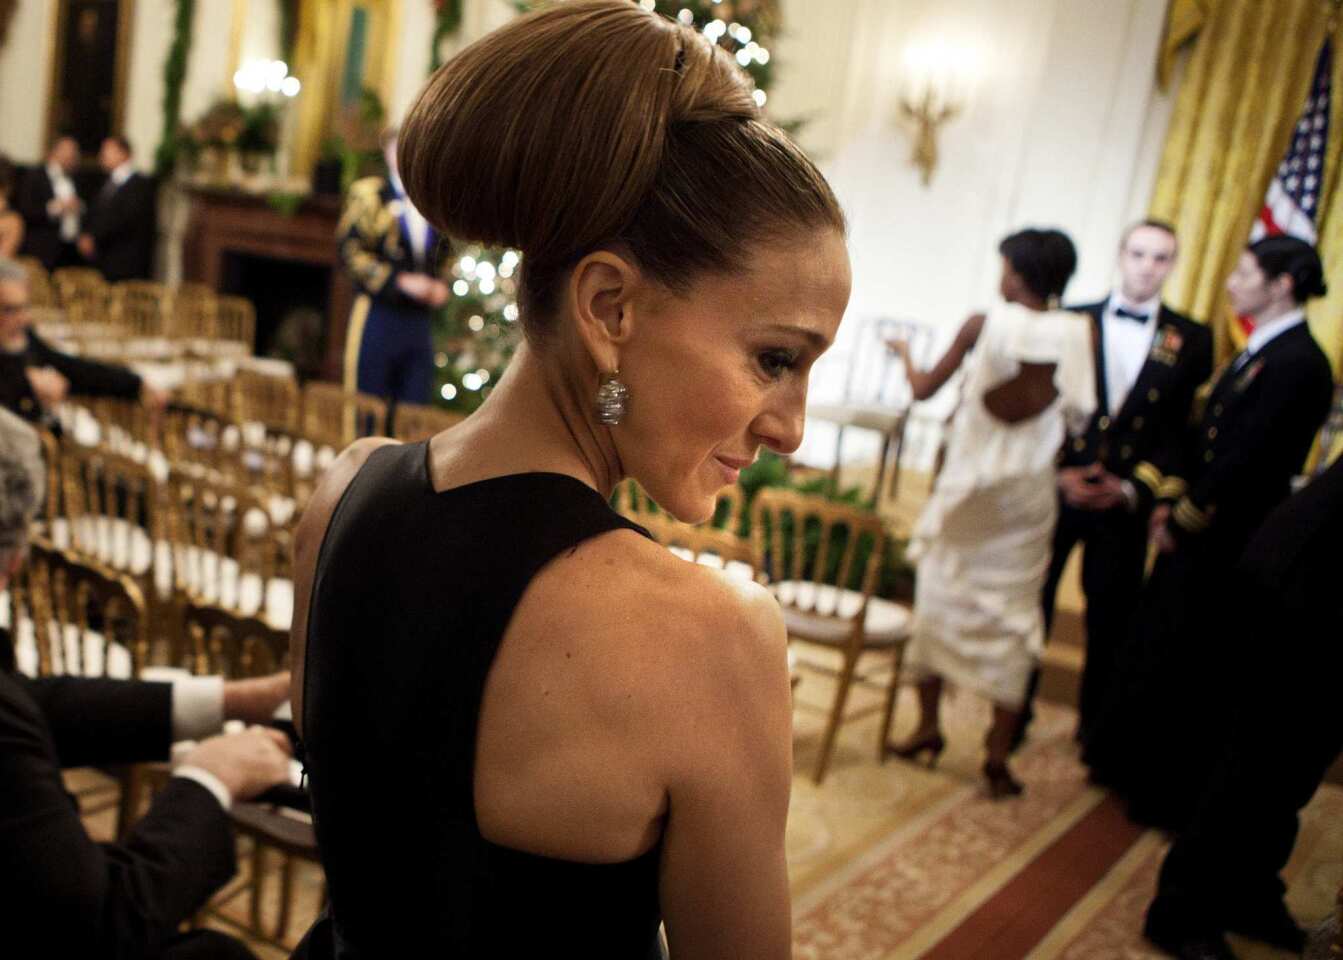 34th Kennedy Center Honors